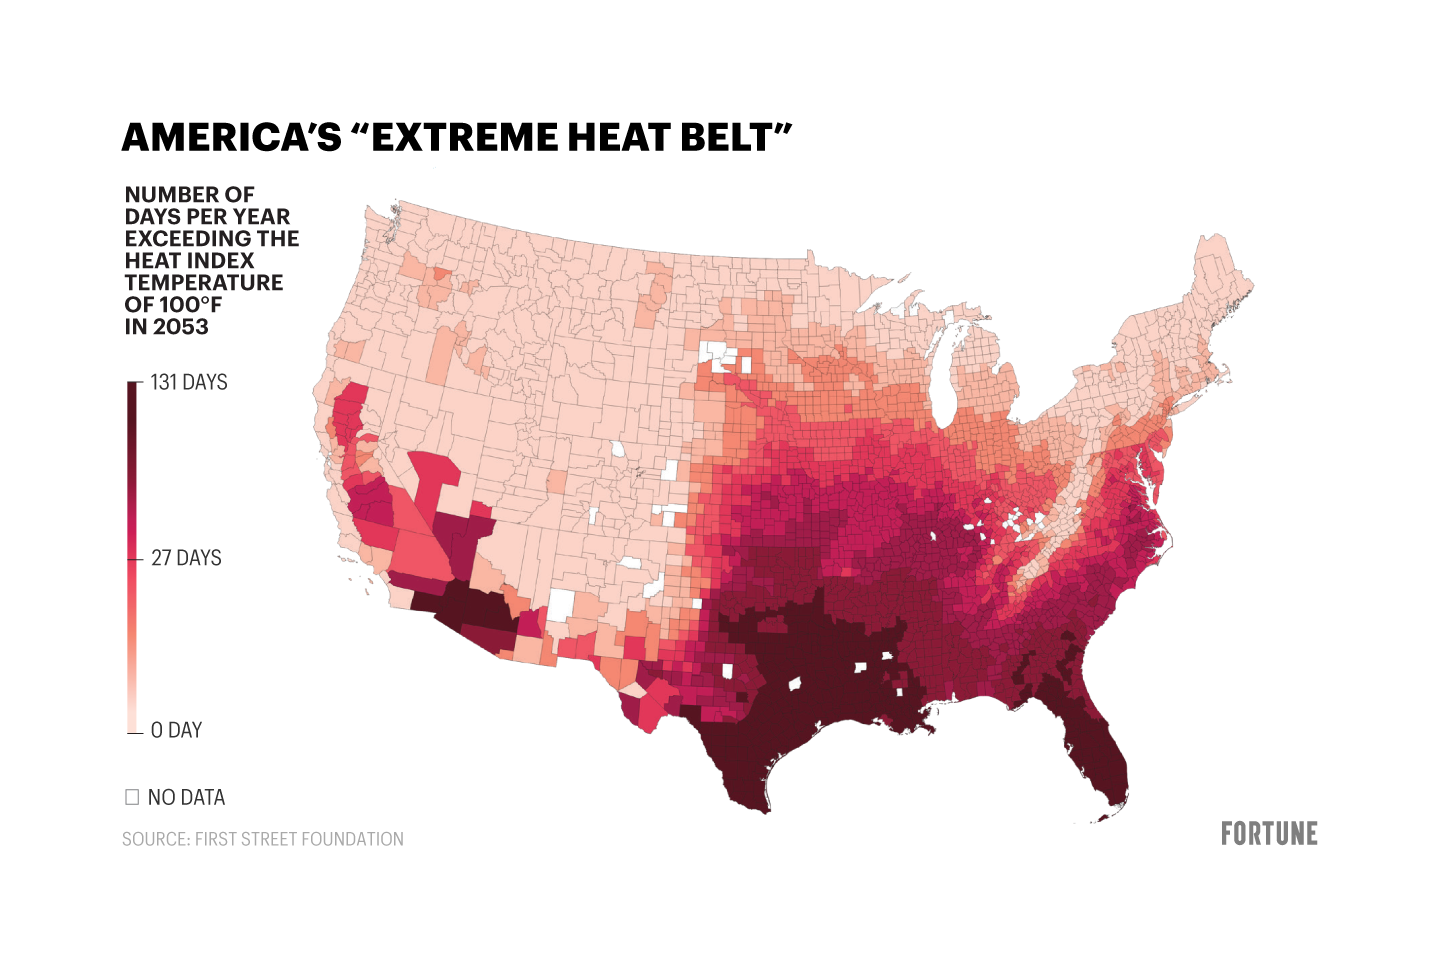 Map shows the number of days per year exceeding 100F heat index in 2053